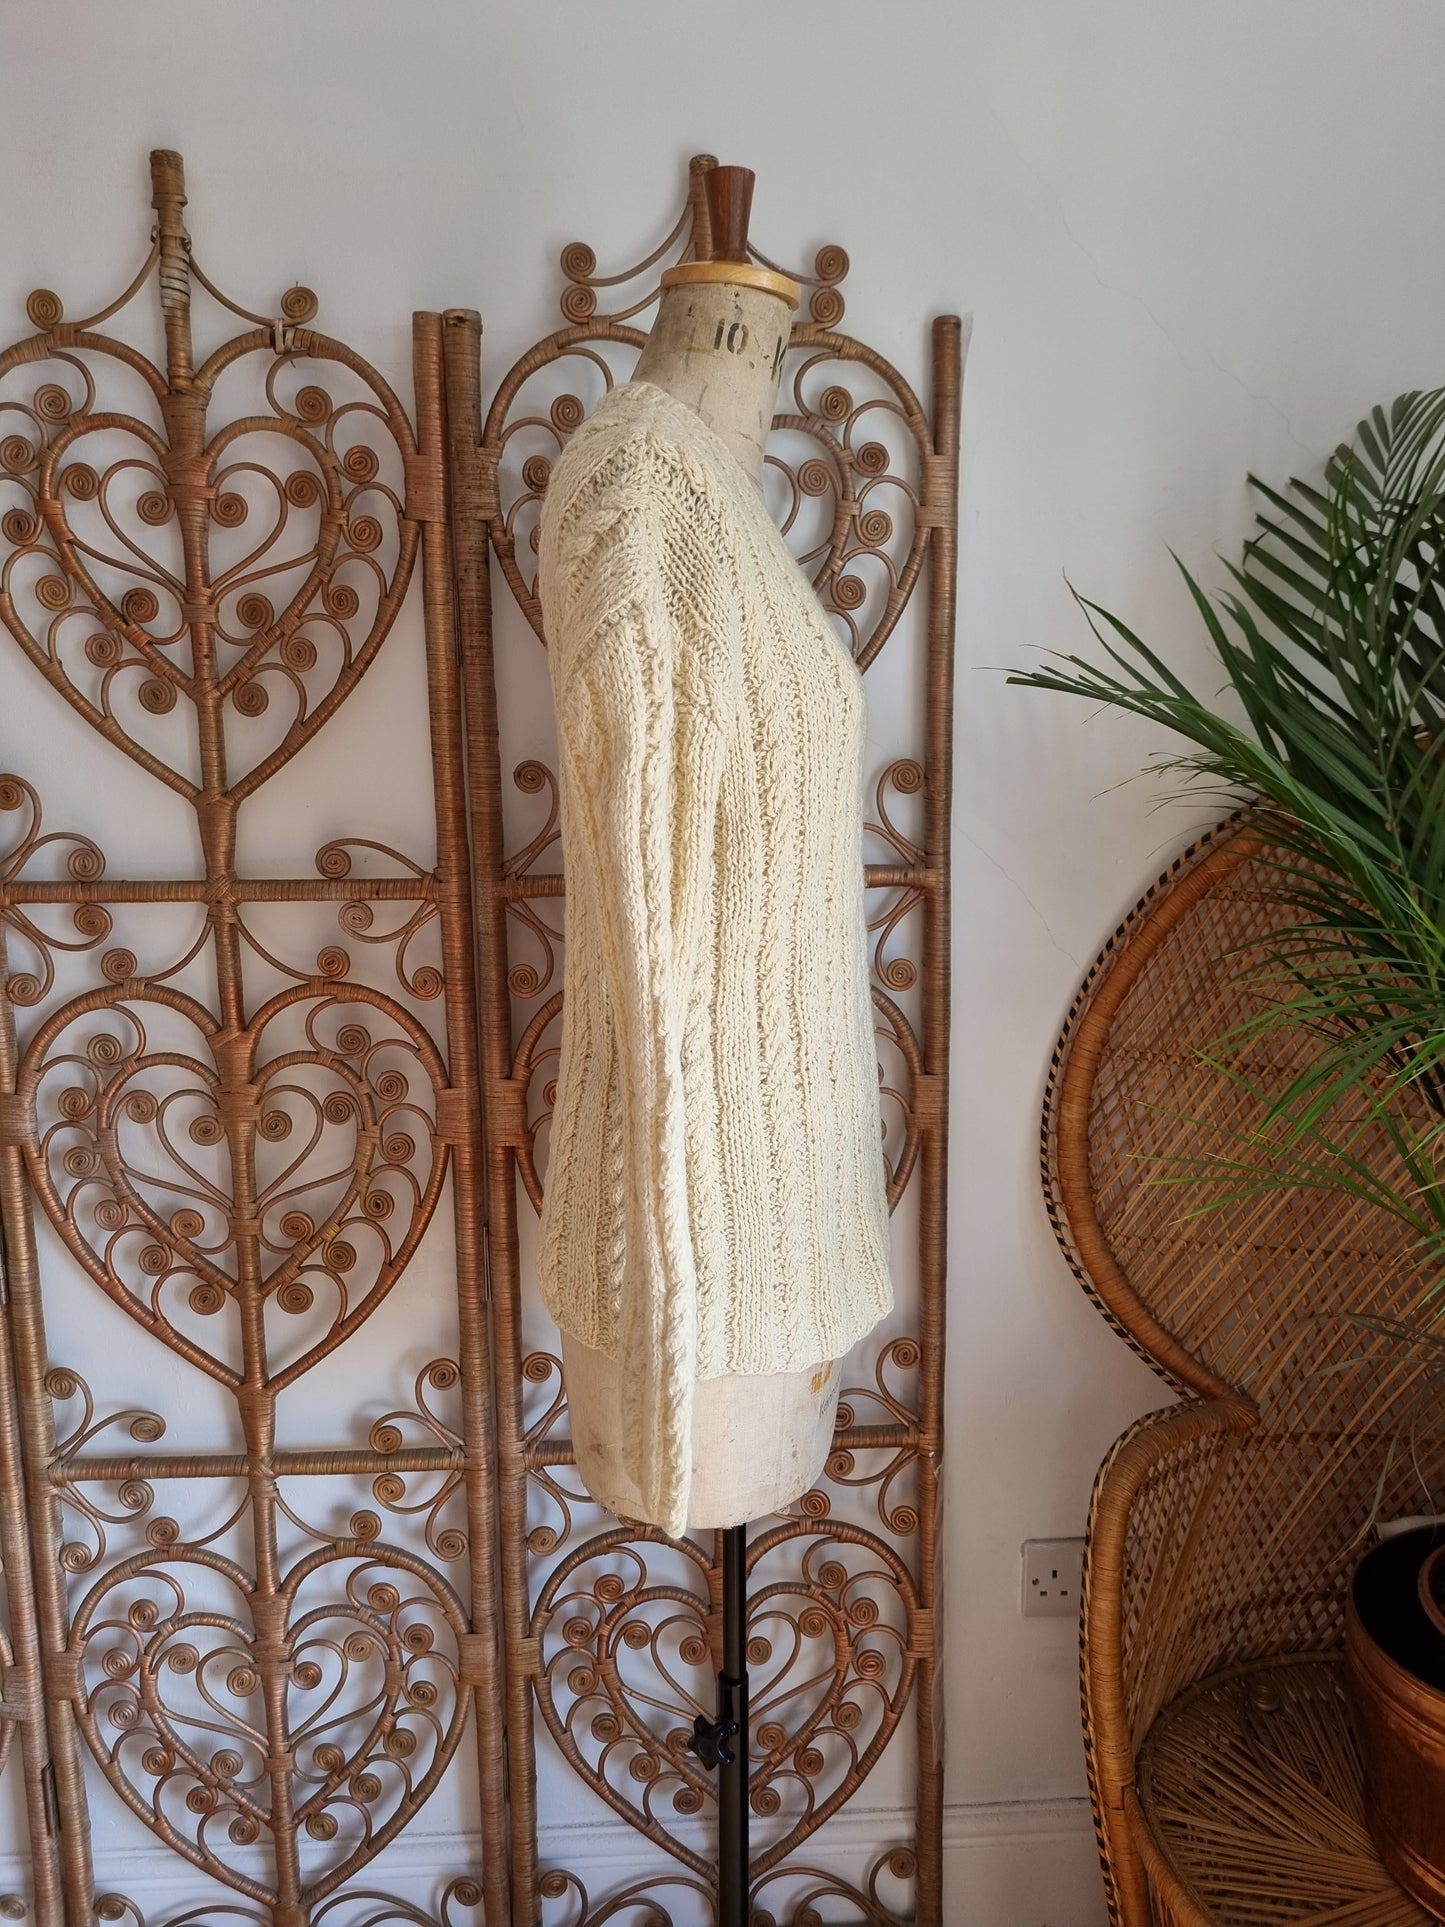 Vintage cable knitted wool jumper